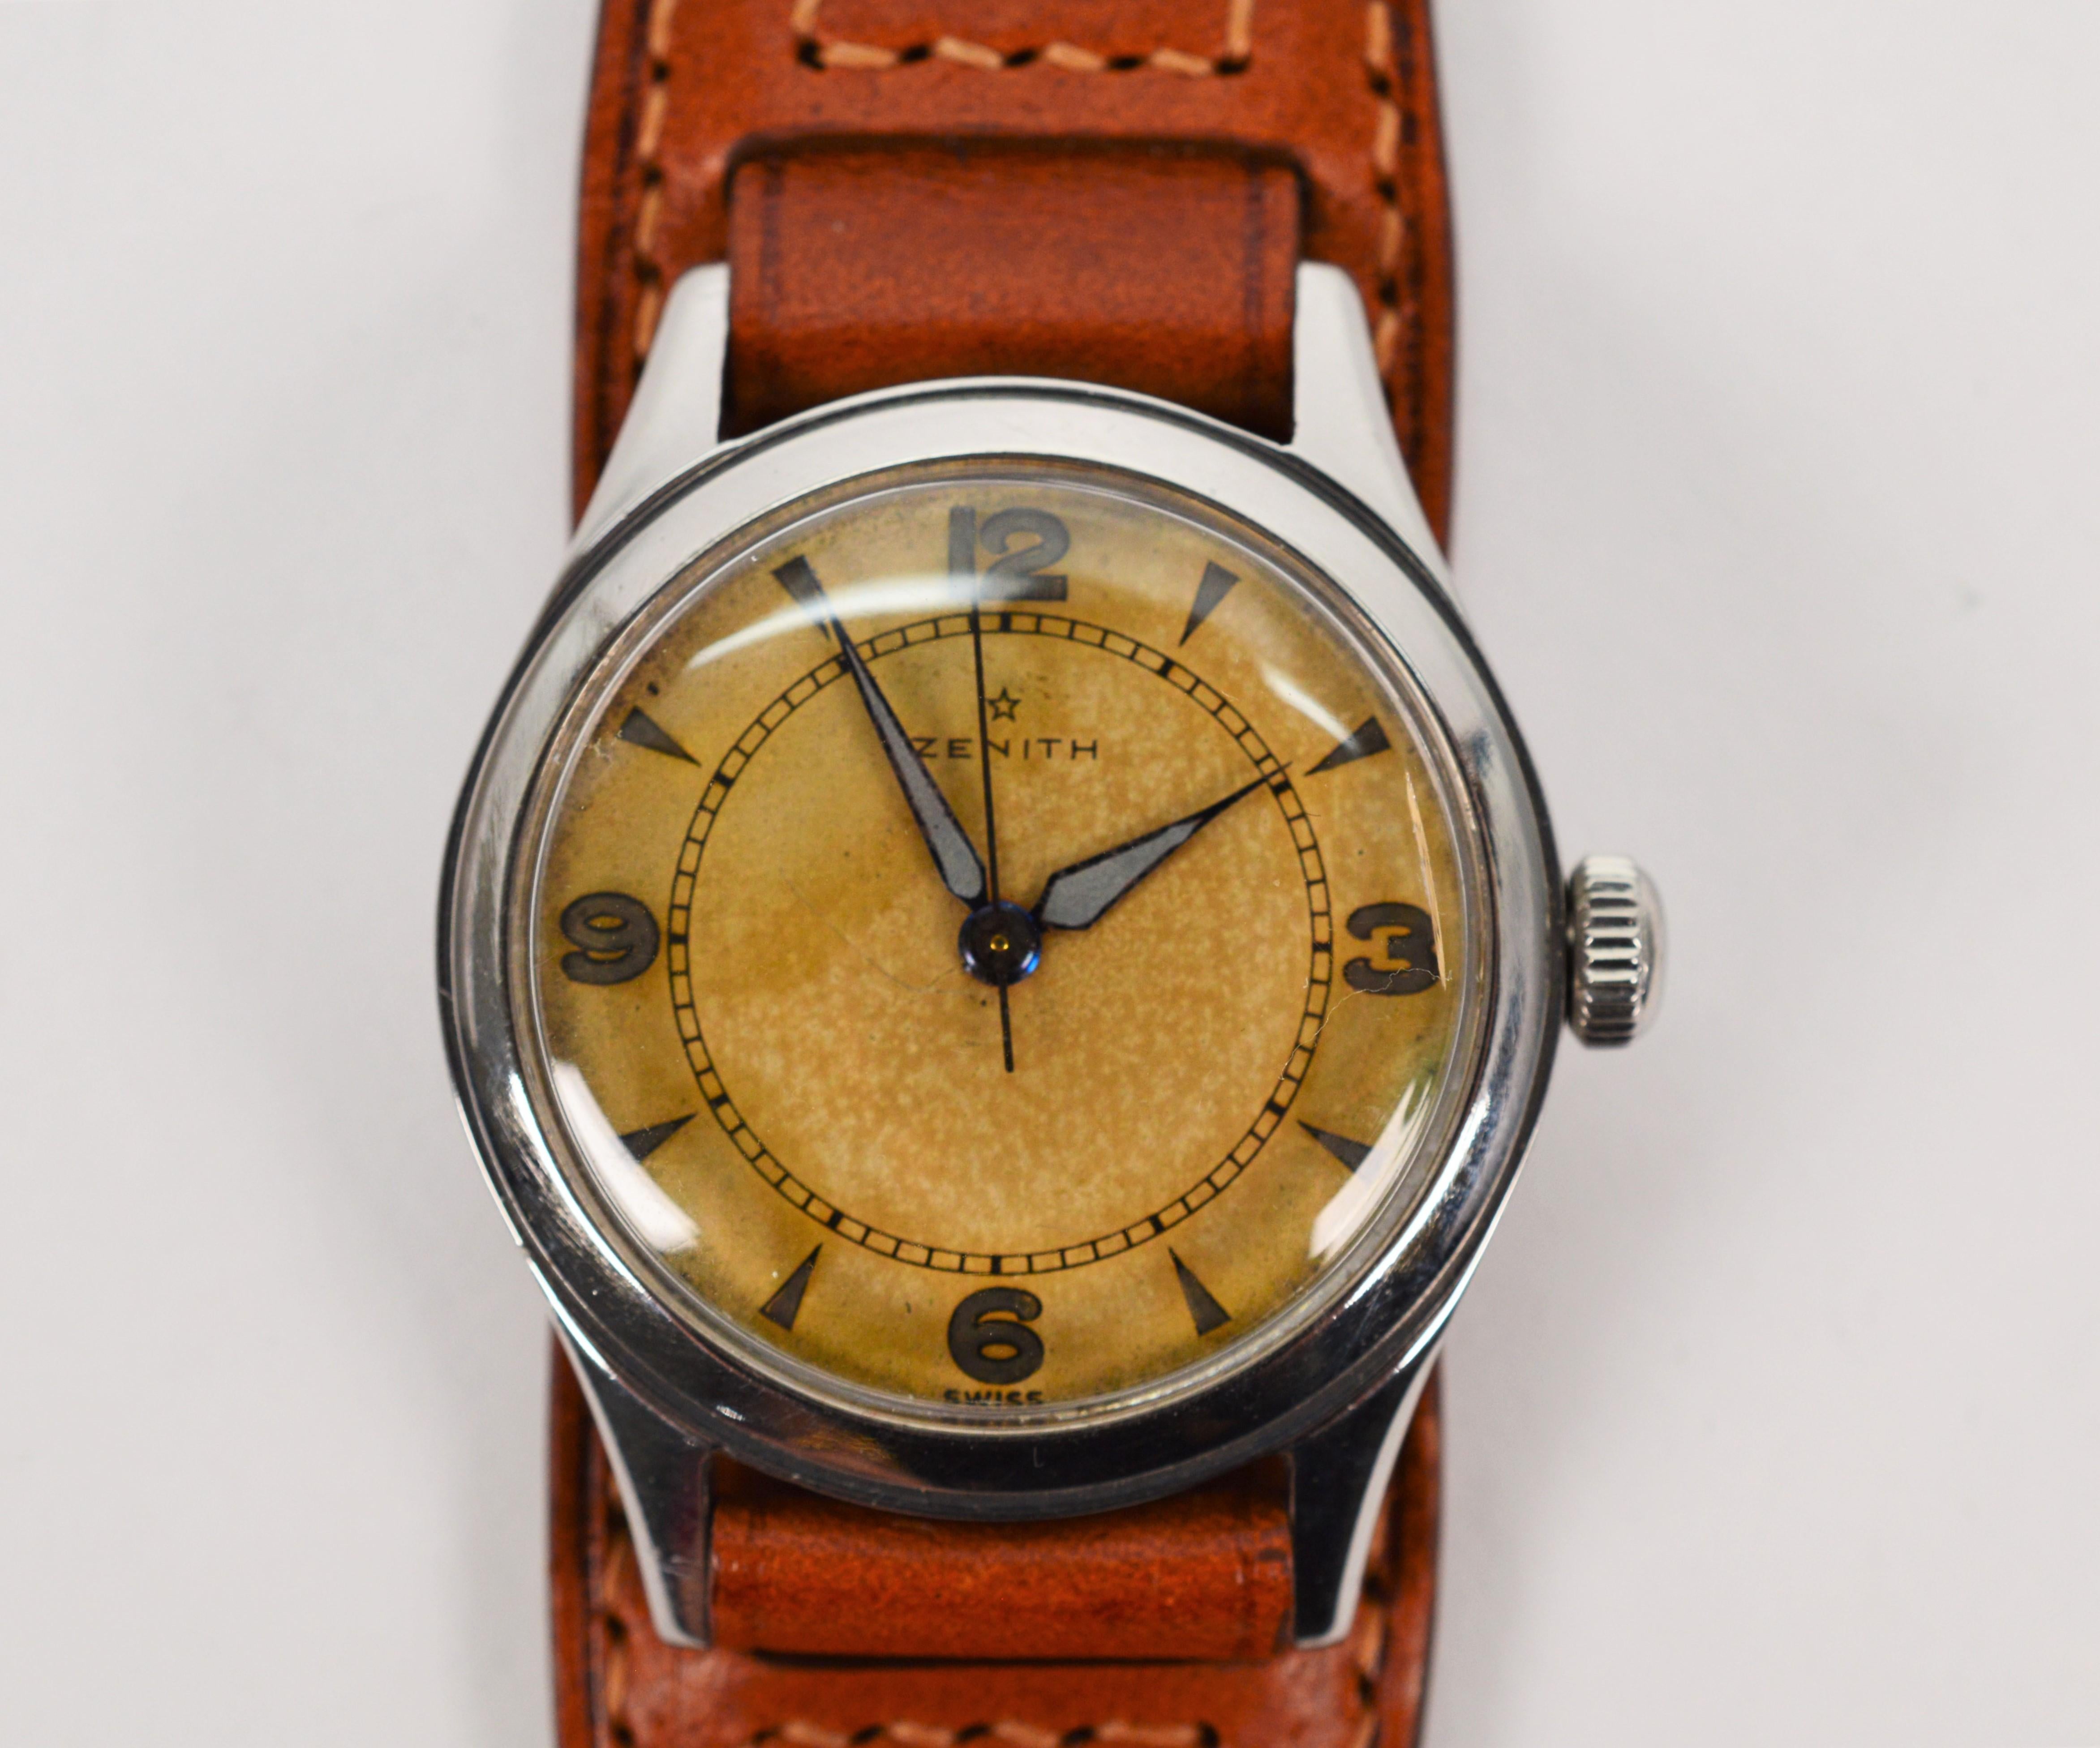 Founded 1865,  Zenith Watch Co has been known for its precision timepieces. Enjoy this great mid 1940's model 3600584 Wrist Watch in pristine vintage condition. With a 31mm brushed steel case 8510554, this smart looking Zenith watch sports its